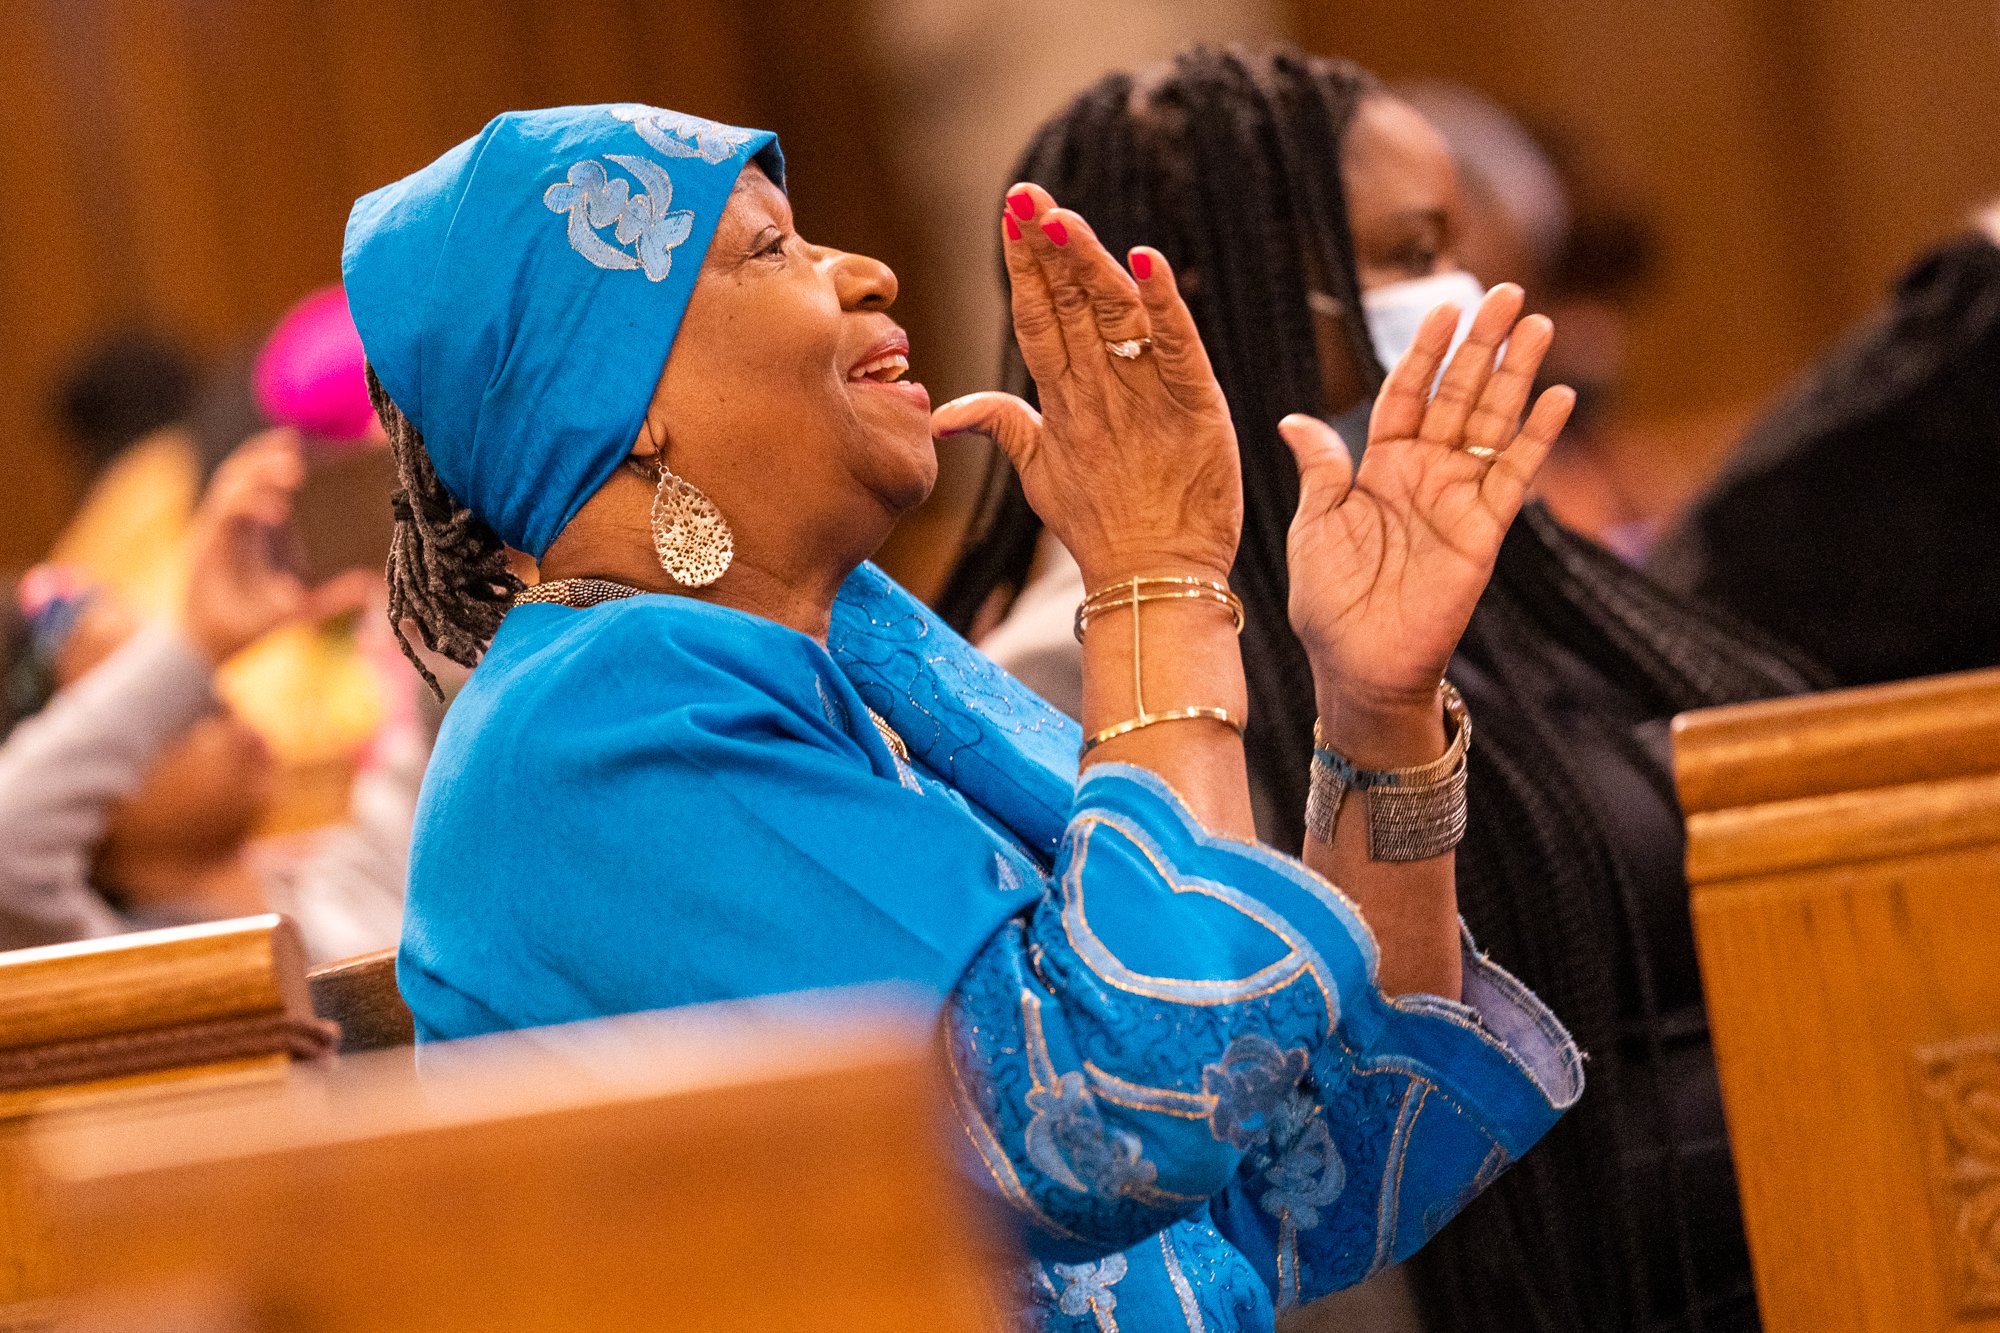 A woman claps during the Feb. 5, 2023, Mass for Black History Month at Holy Comforter-St. Cyprian Church in Washington. During the Mass, Cardinal Wilton D. Gregory called on Black Catholics and all people of color to "vastly improve our world with an understanding of the strength of character that resides within the souls of our people." (OSV News photo/Mihoko Owada, Catholic Standard)